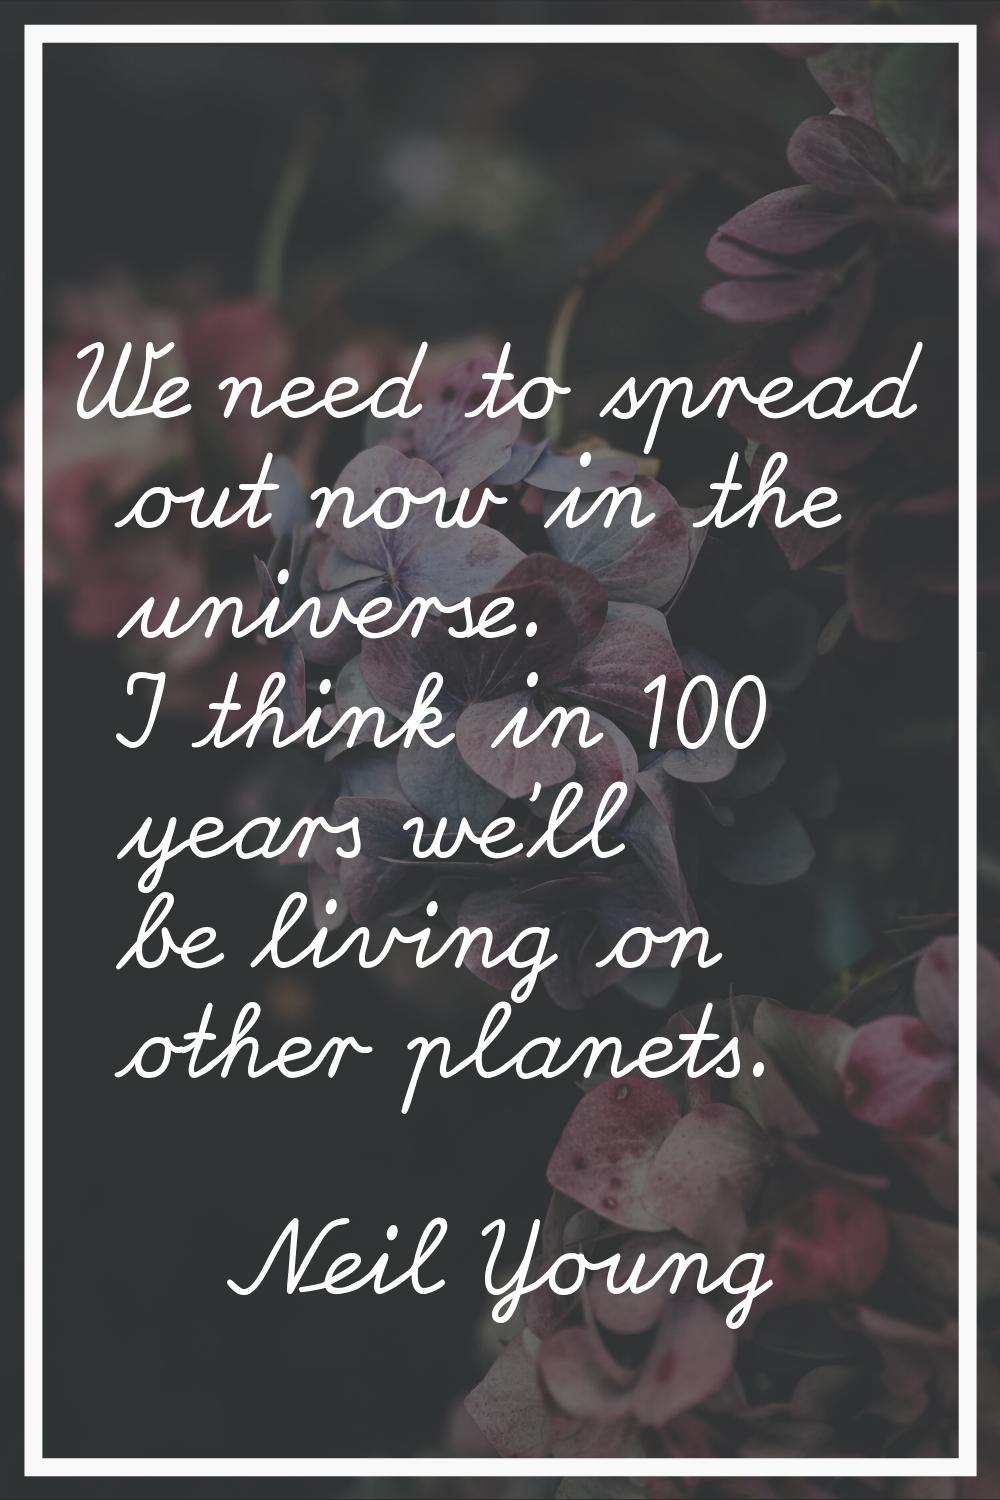 We need to spread out now in the universe. I think in 100 years we'll be living on other planets.